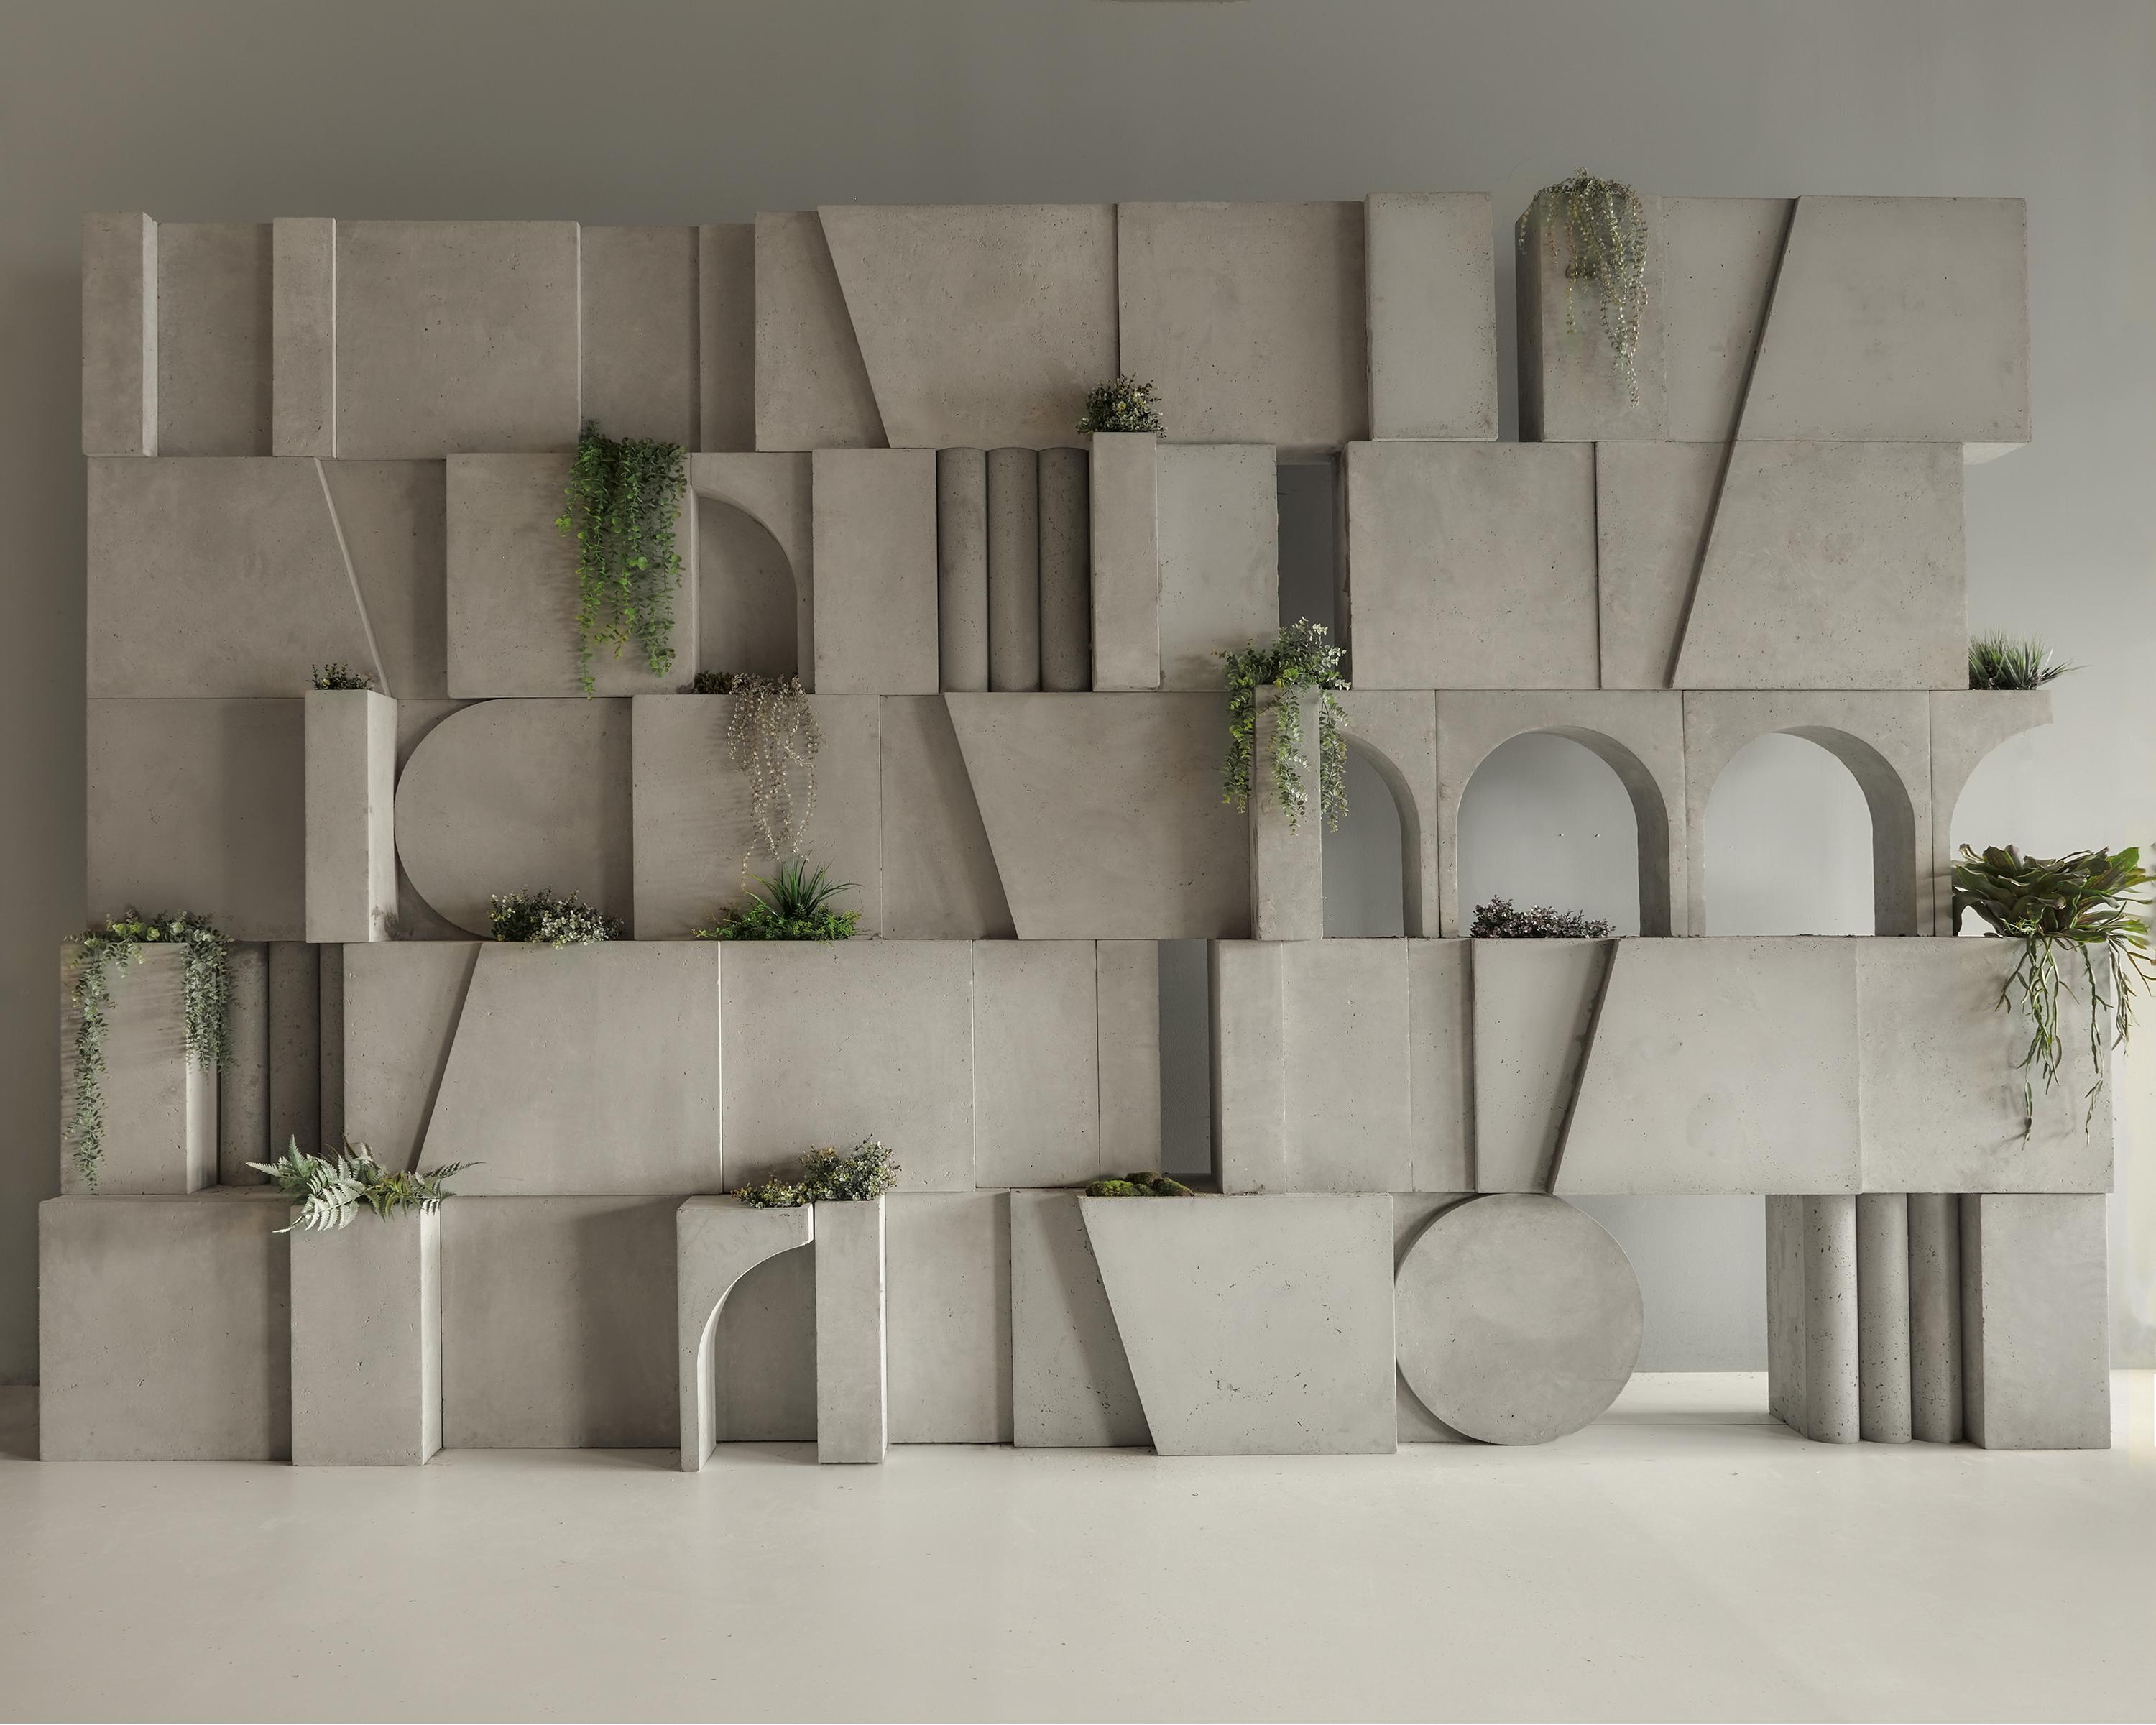 Spolia Wallscape is a family of new architectural wall treatments from Brooklyn based Biophilic design Studio OPIARY. It’s a system of bold geometric modular hollow concrete blocks in stackable rows. It can be a freestanding wall or screen or tiles